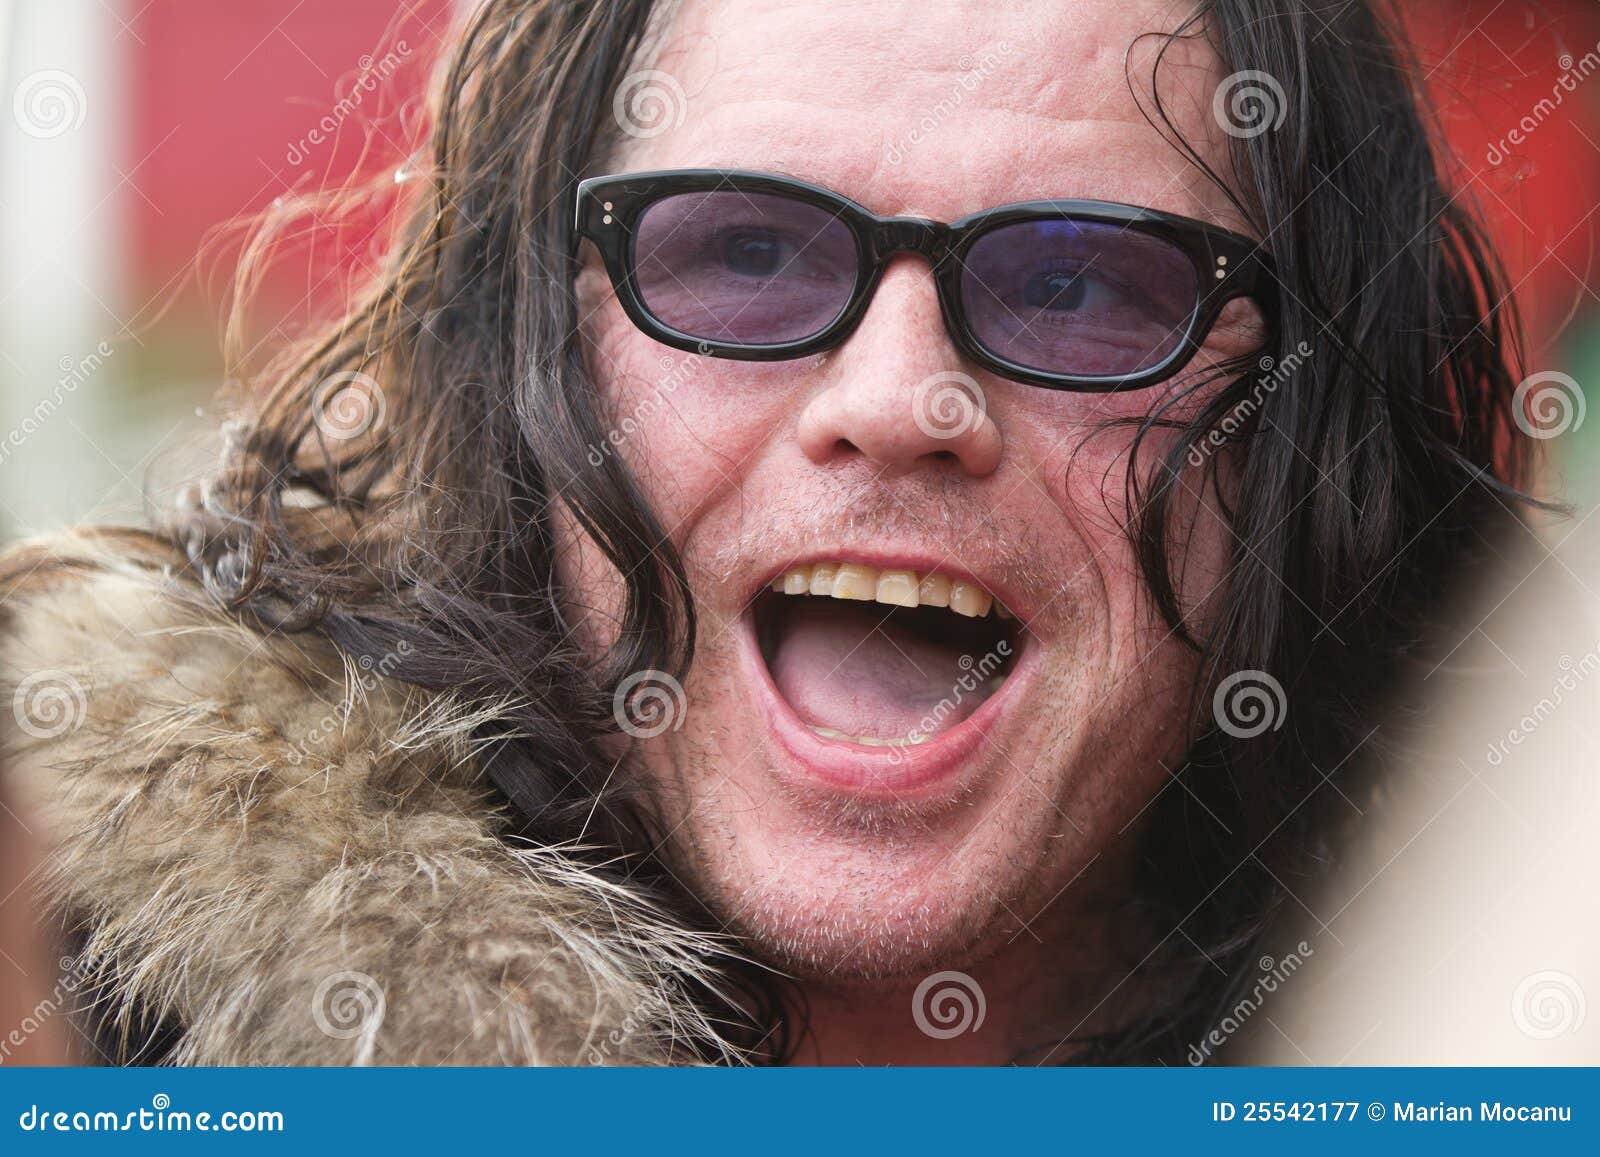 Ian Robert Astbury (born 14 May 1962, Heswall, Merseyside) is an English rock musician and songwriter best known as the lead vocalist for the rock band The ... - ian-astbury-25542177